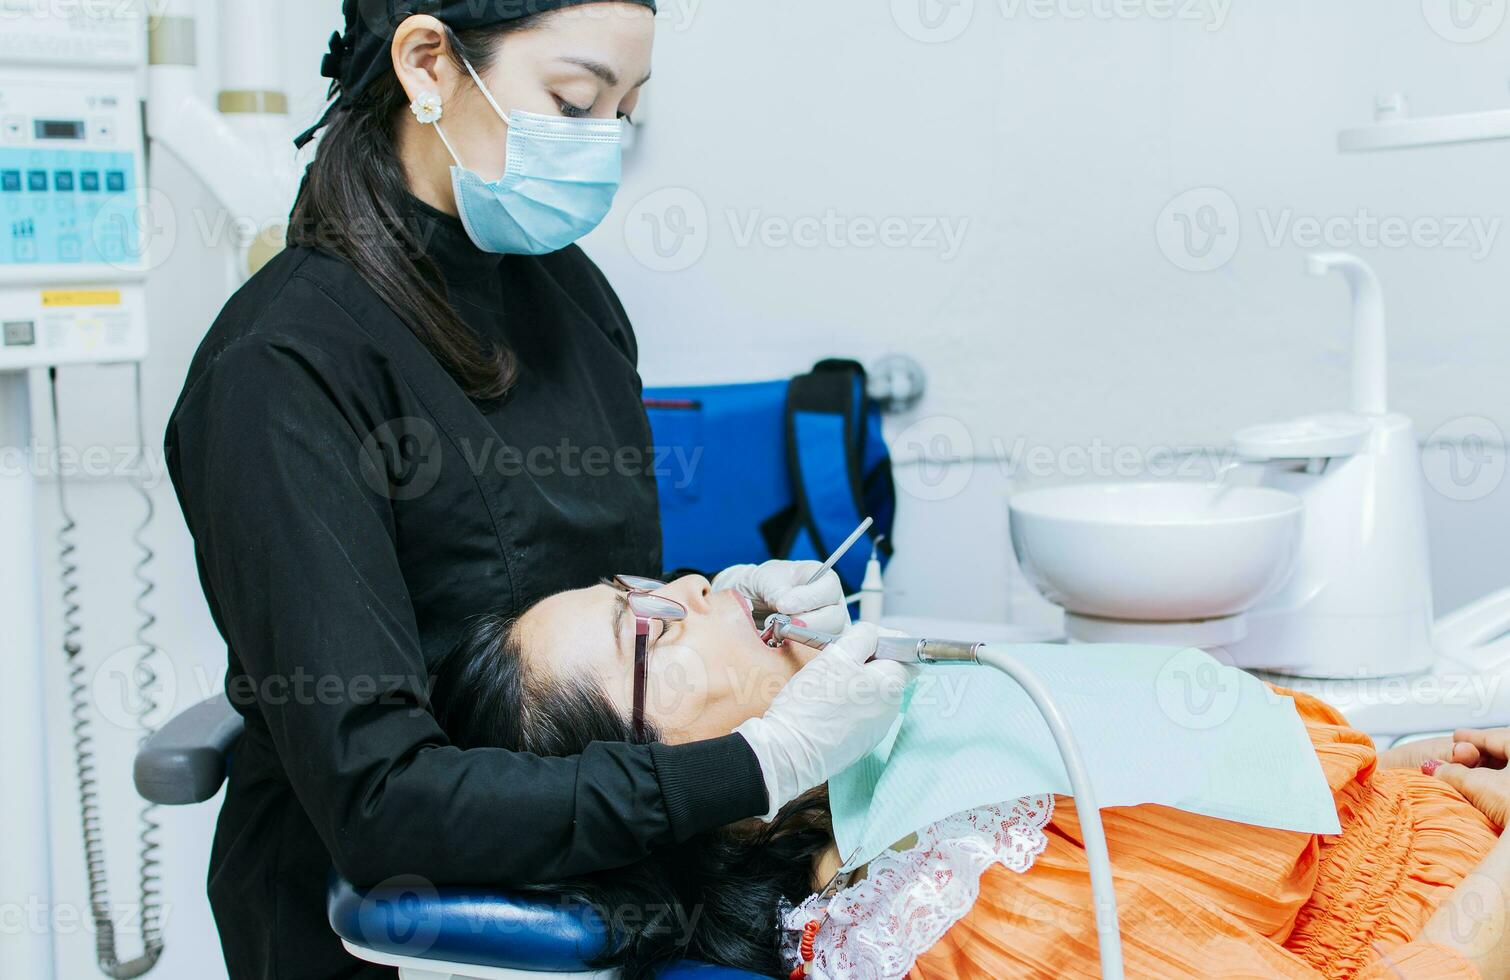 The stomatologist cleaning a patient's teeth, a dentist cleaning a patient's mouth, a dentist cleaning a patient's caries, a dentist cleaning a patient's mouth photo